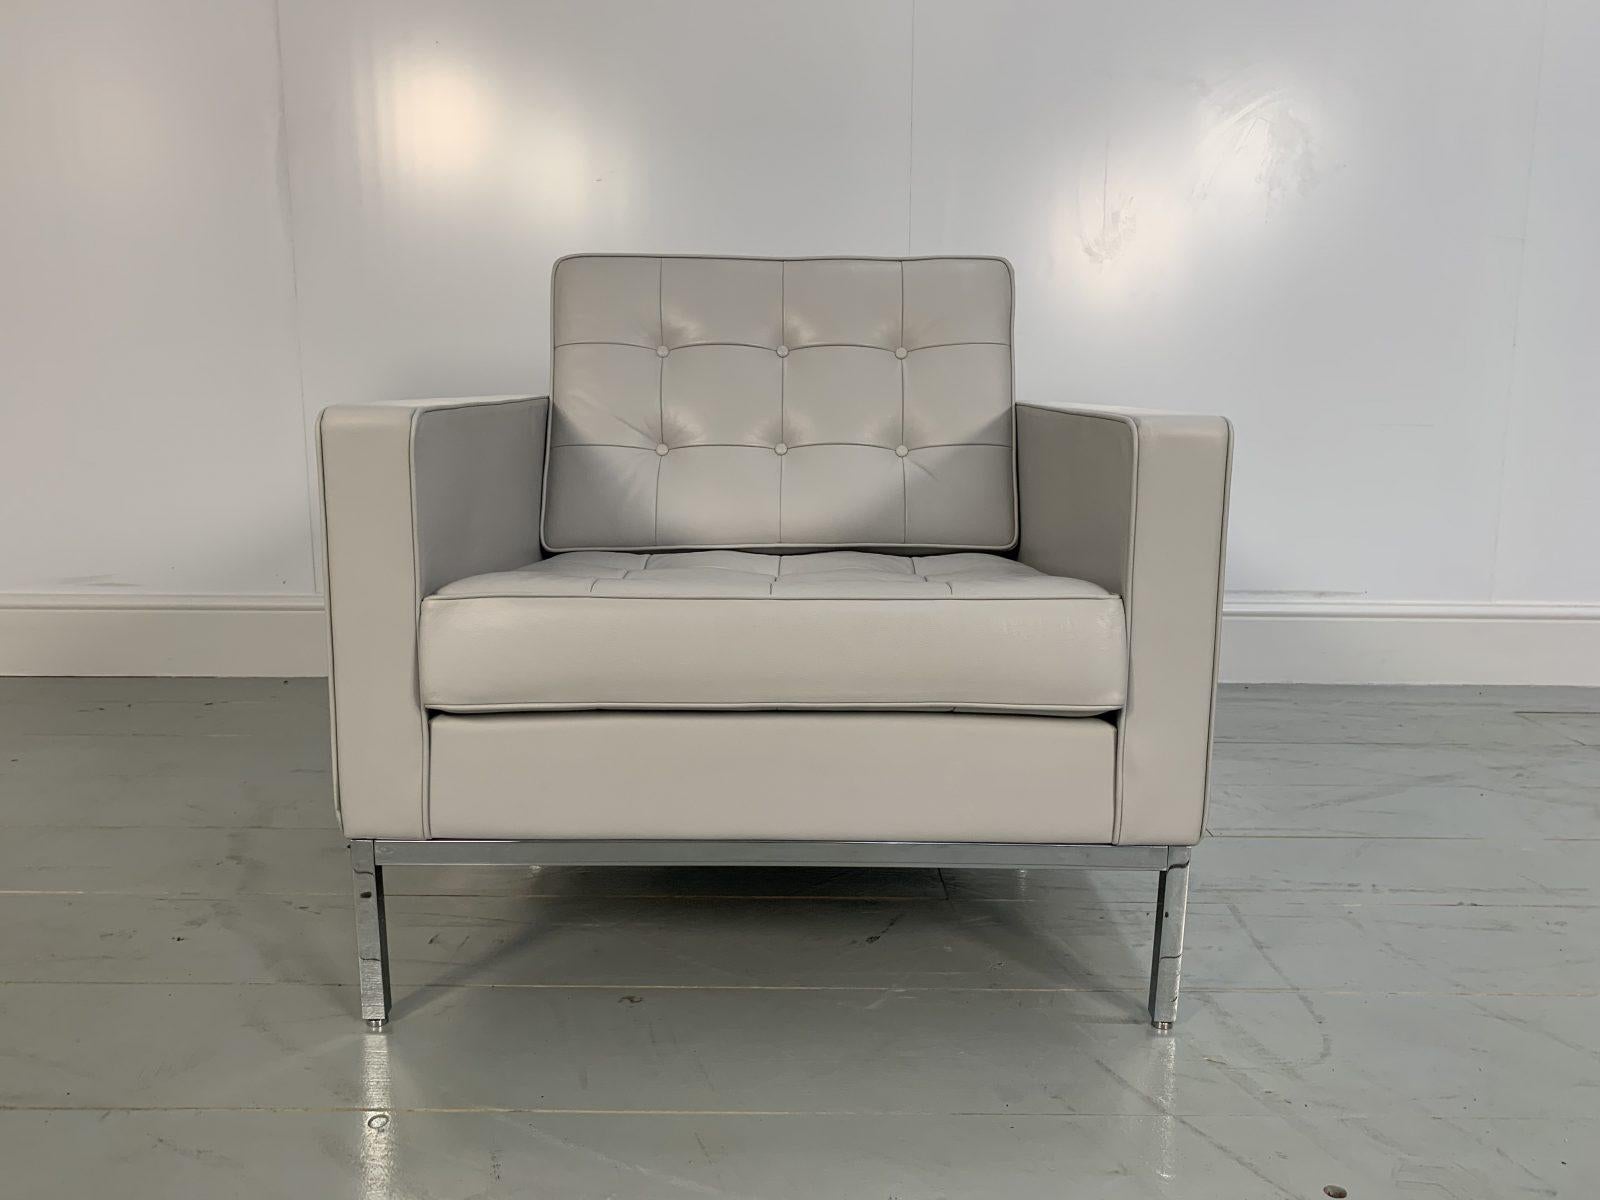 On offer on this occasion is a rare, original “Florence Knoll” Lounge Chair from the world renown furniture house of Knoll Studio, dressed in their sublime Knoll “Volo” Leather in Pale-Grey, and with Polished Chrome framework.

As you will no